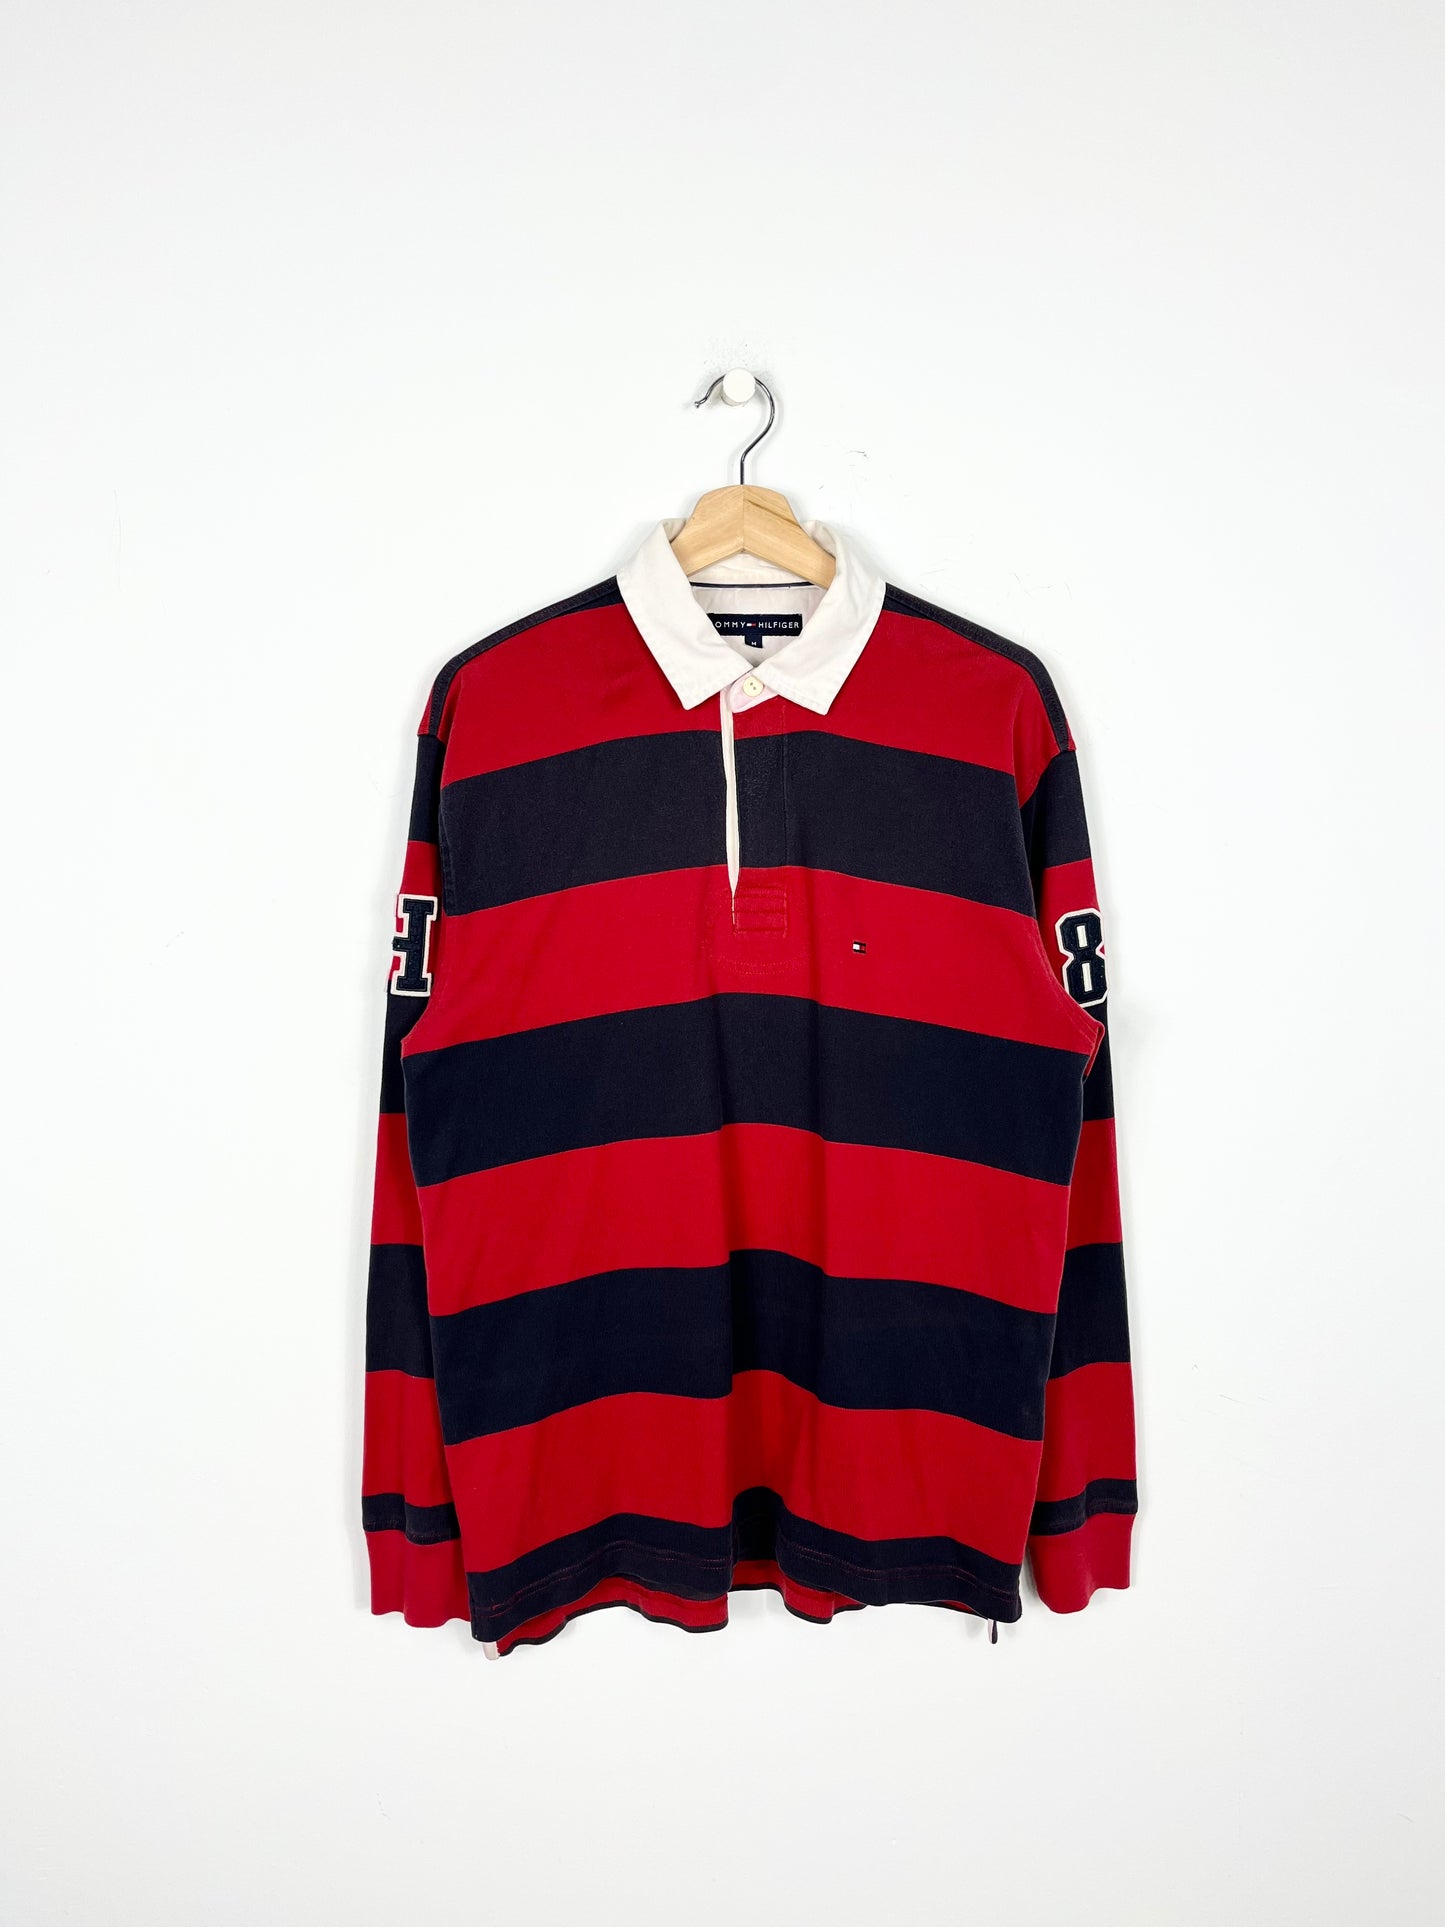 TOMMY HILFIGER VINTAGE RUGBY POLO SHIRT (M/M OVERSIZE)